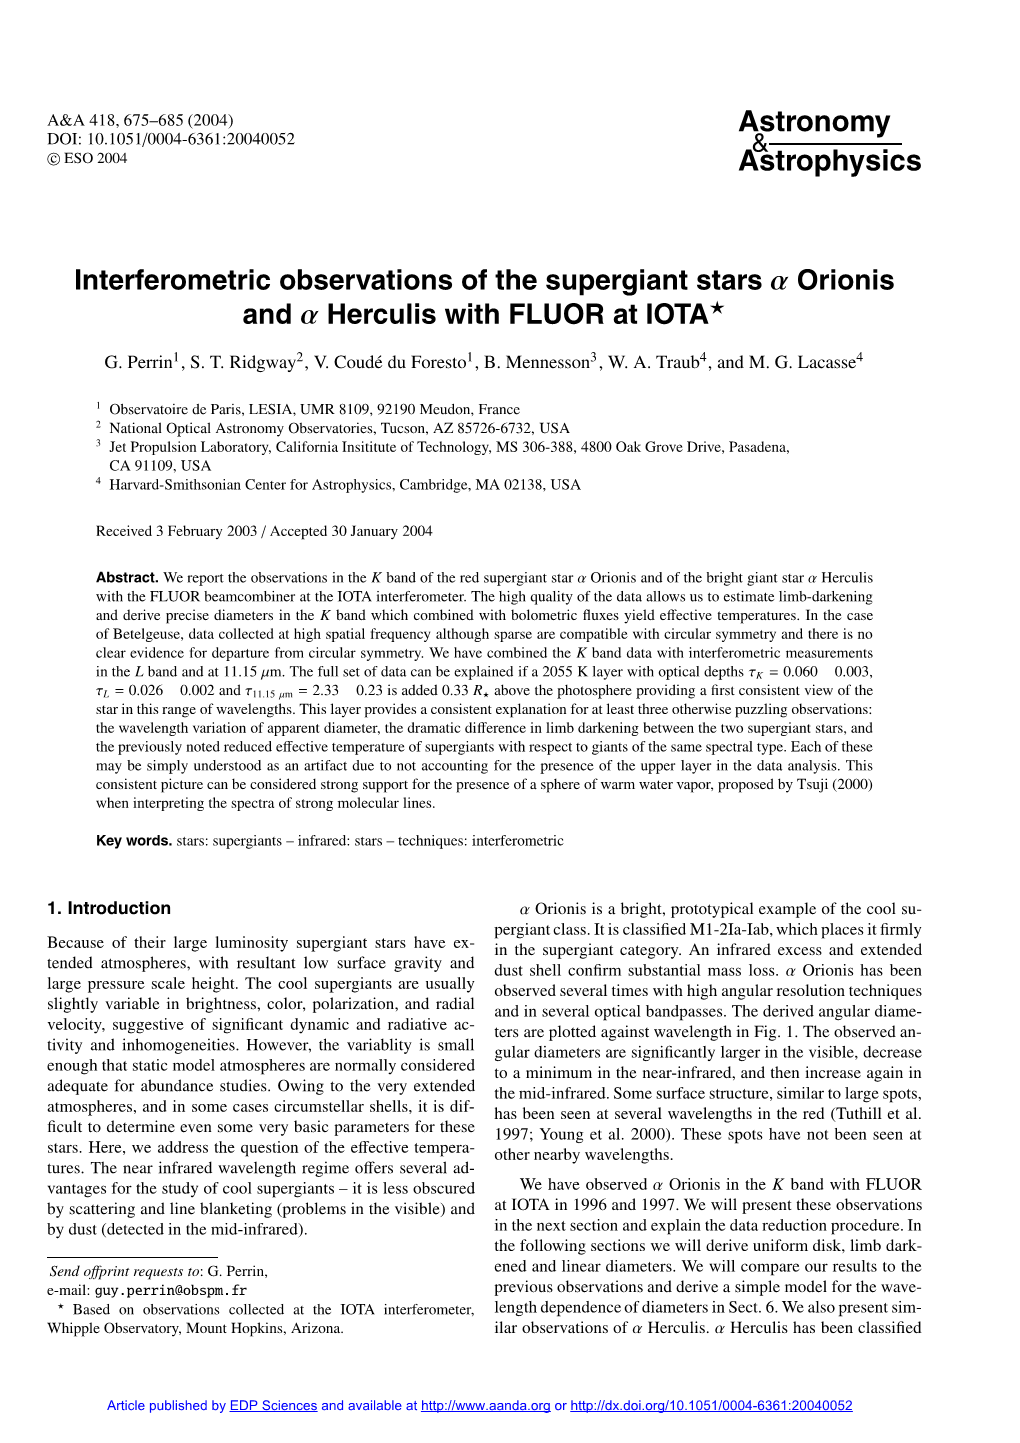 Interferometric Observations of the Supergiant Stars Α Orionis and Α Herculis with FLUOR at IOTA